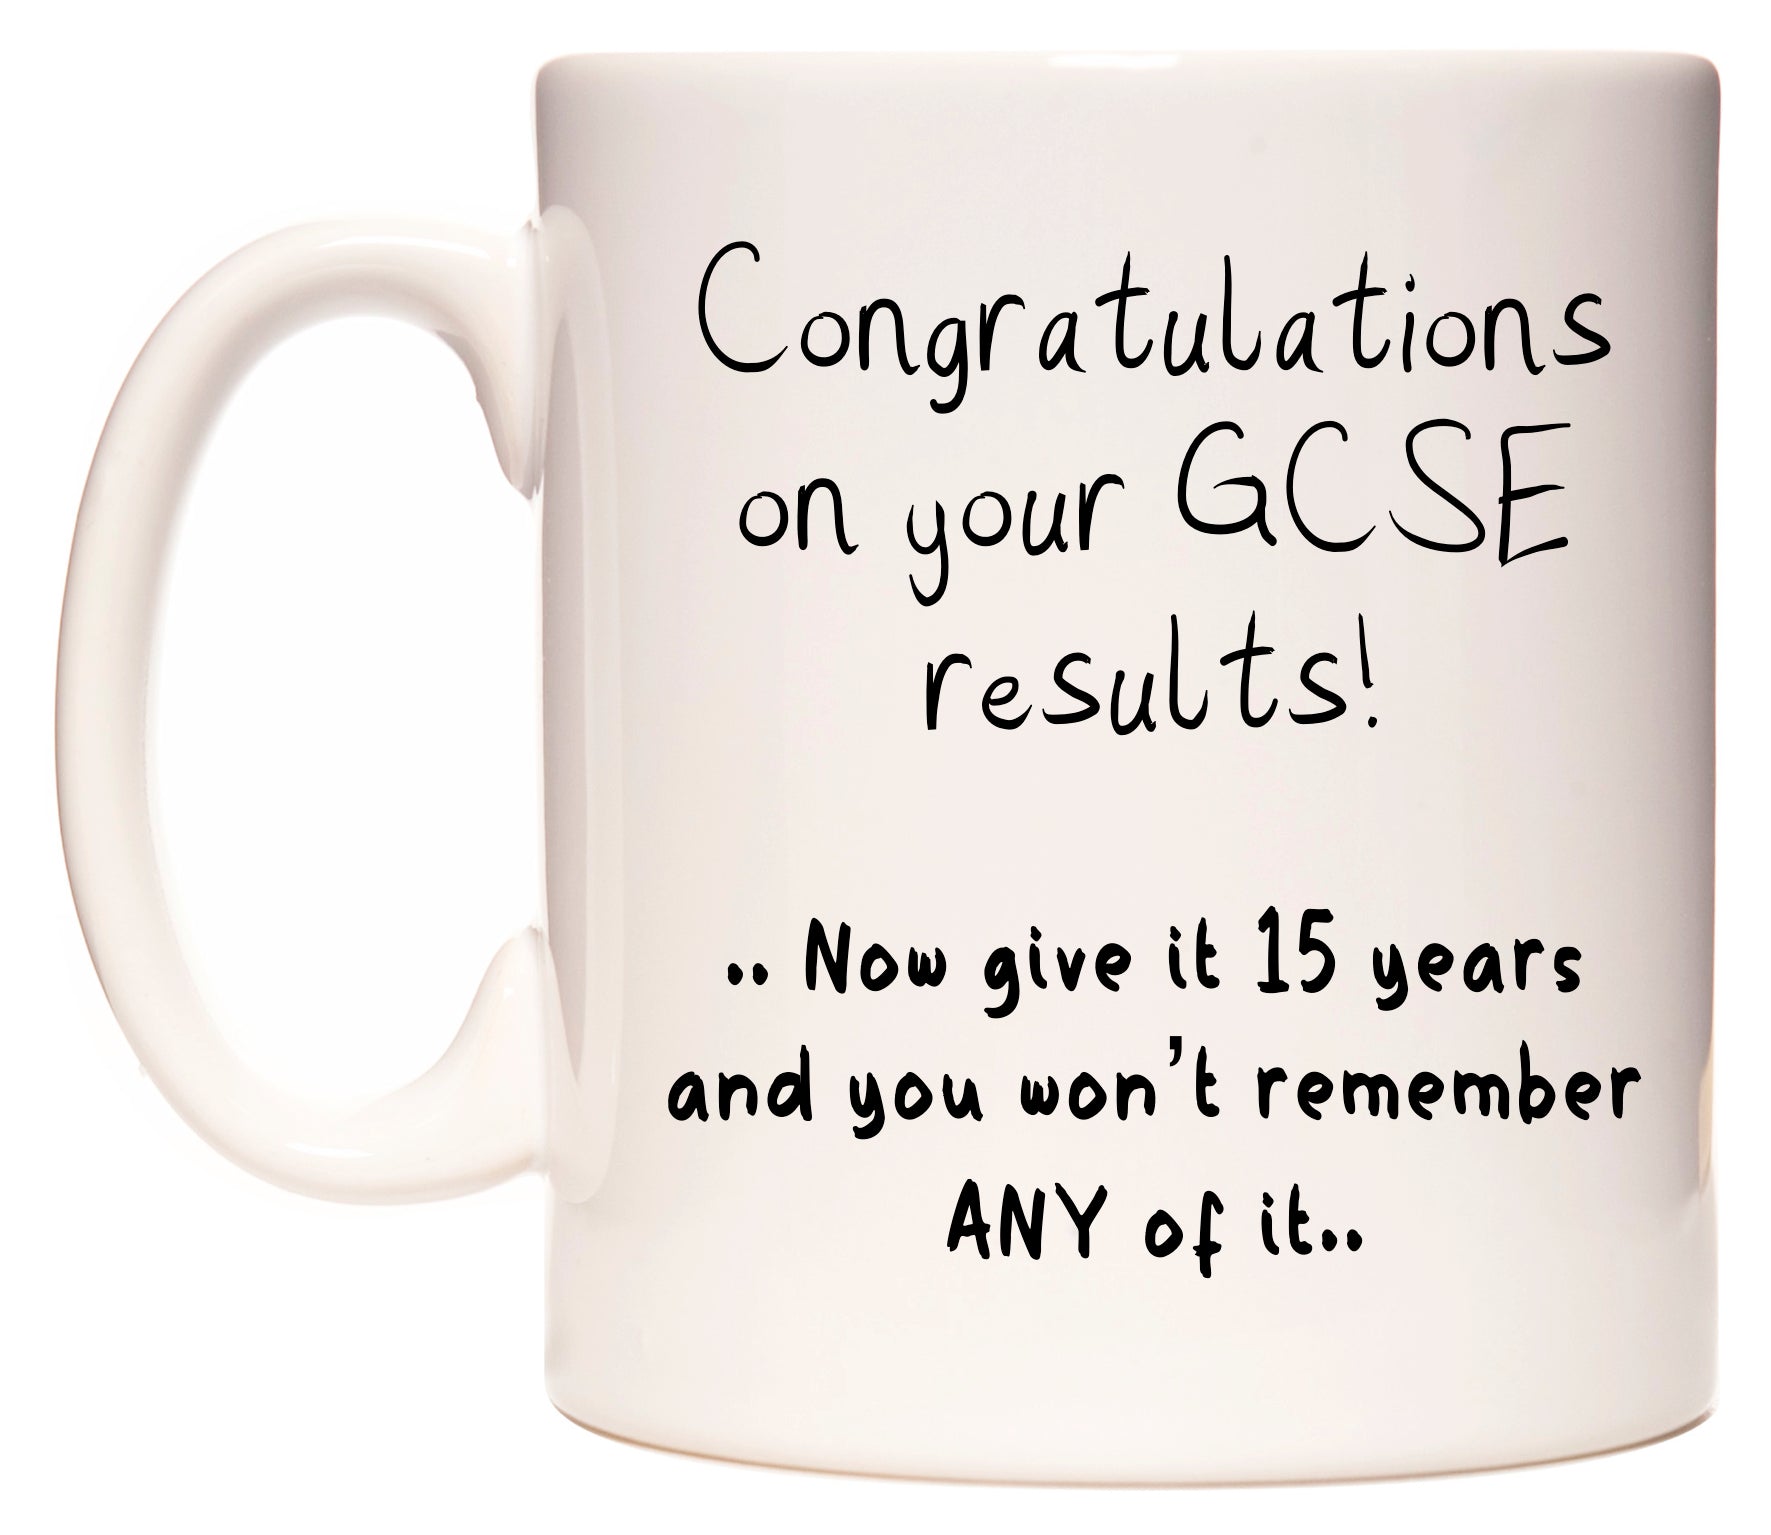 This mug features Congratulations on your GCSE results .. Now give it 15 years and you won't remember ANY of it..